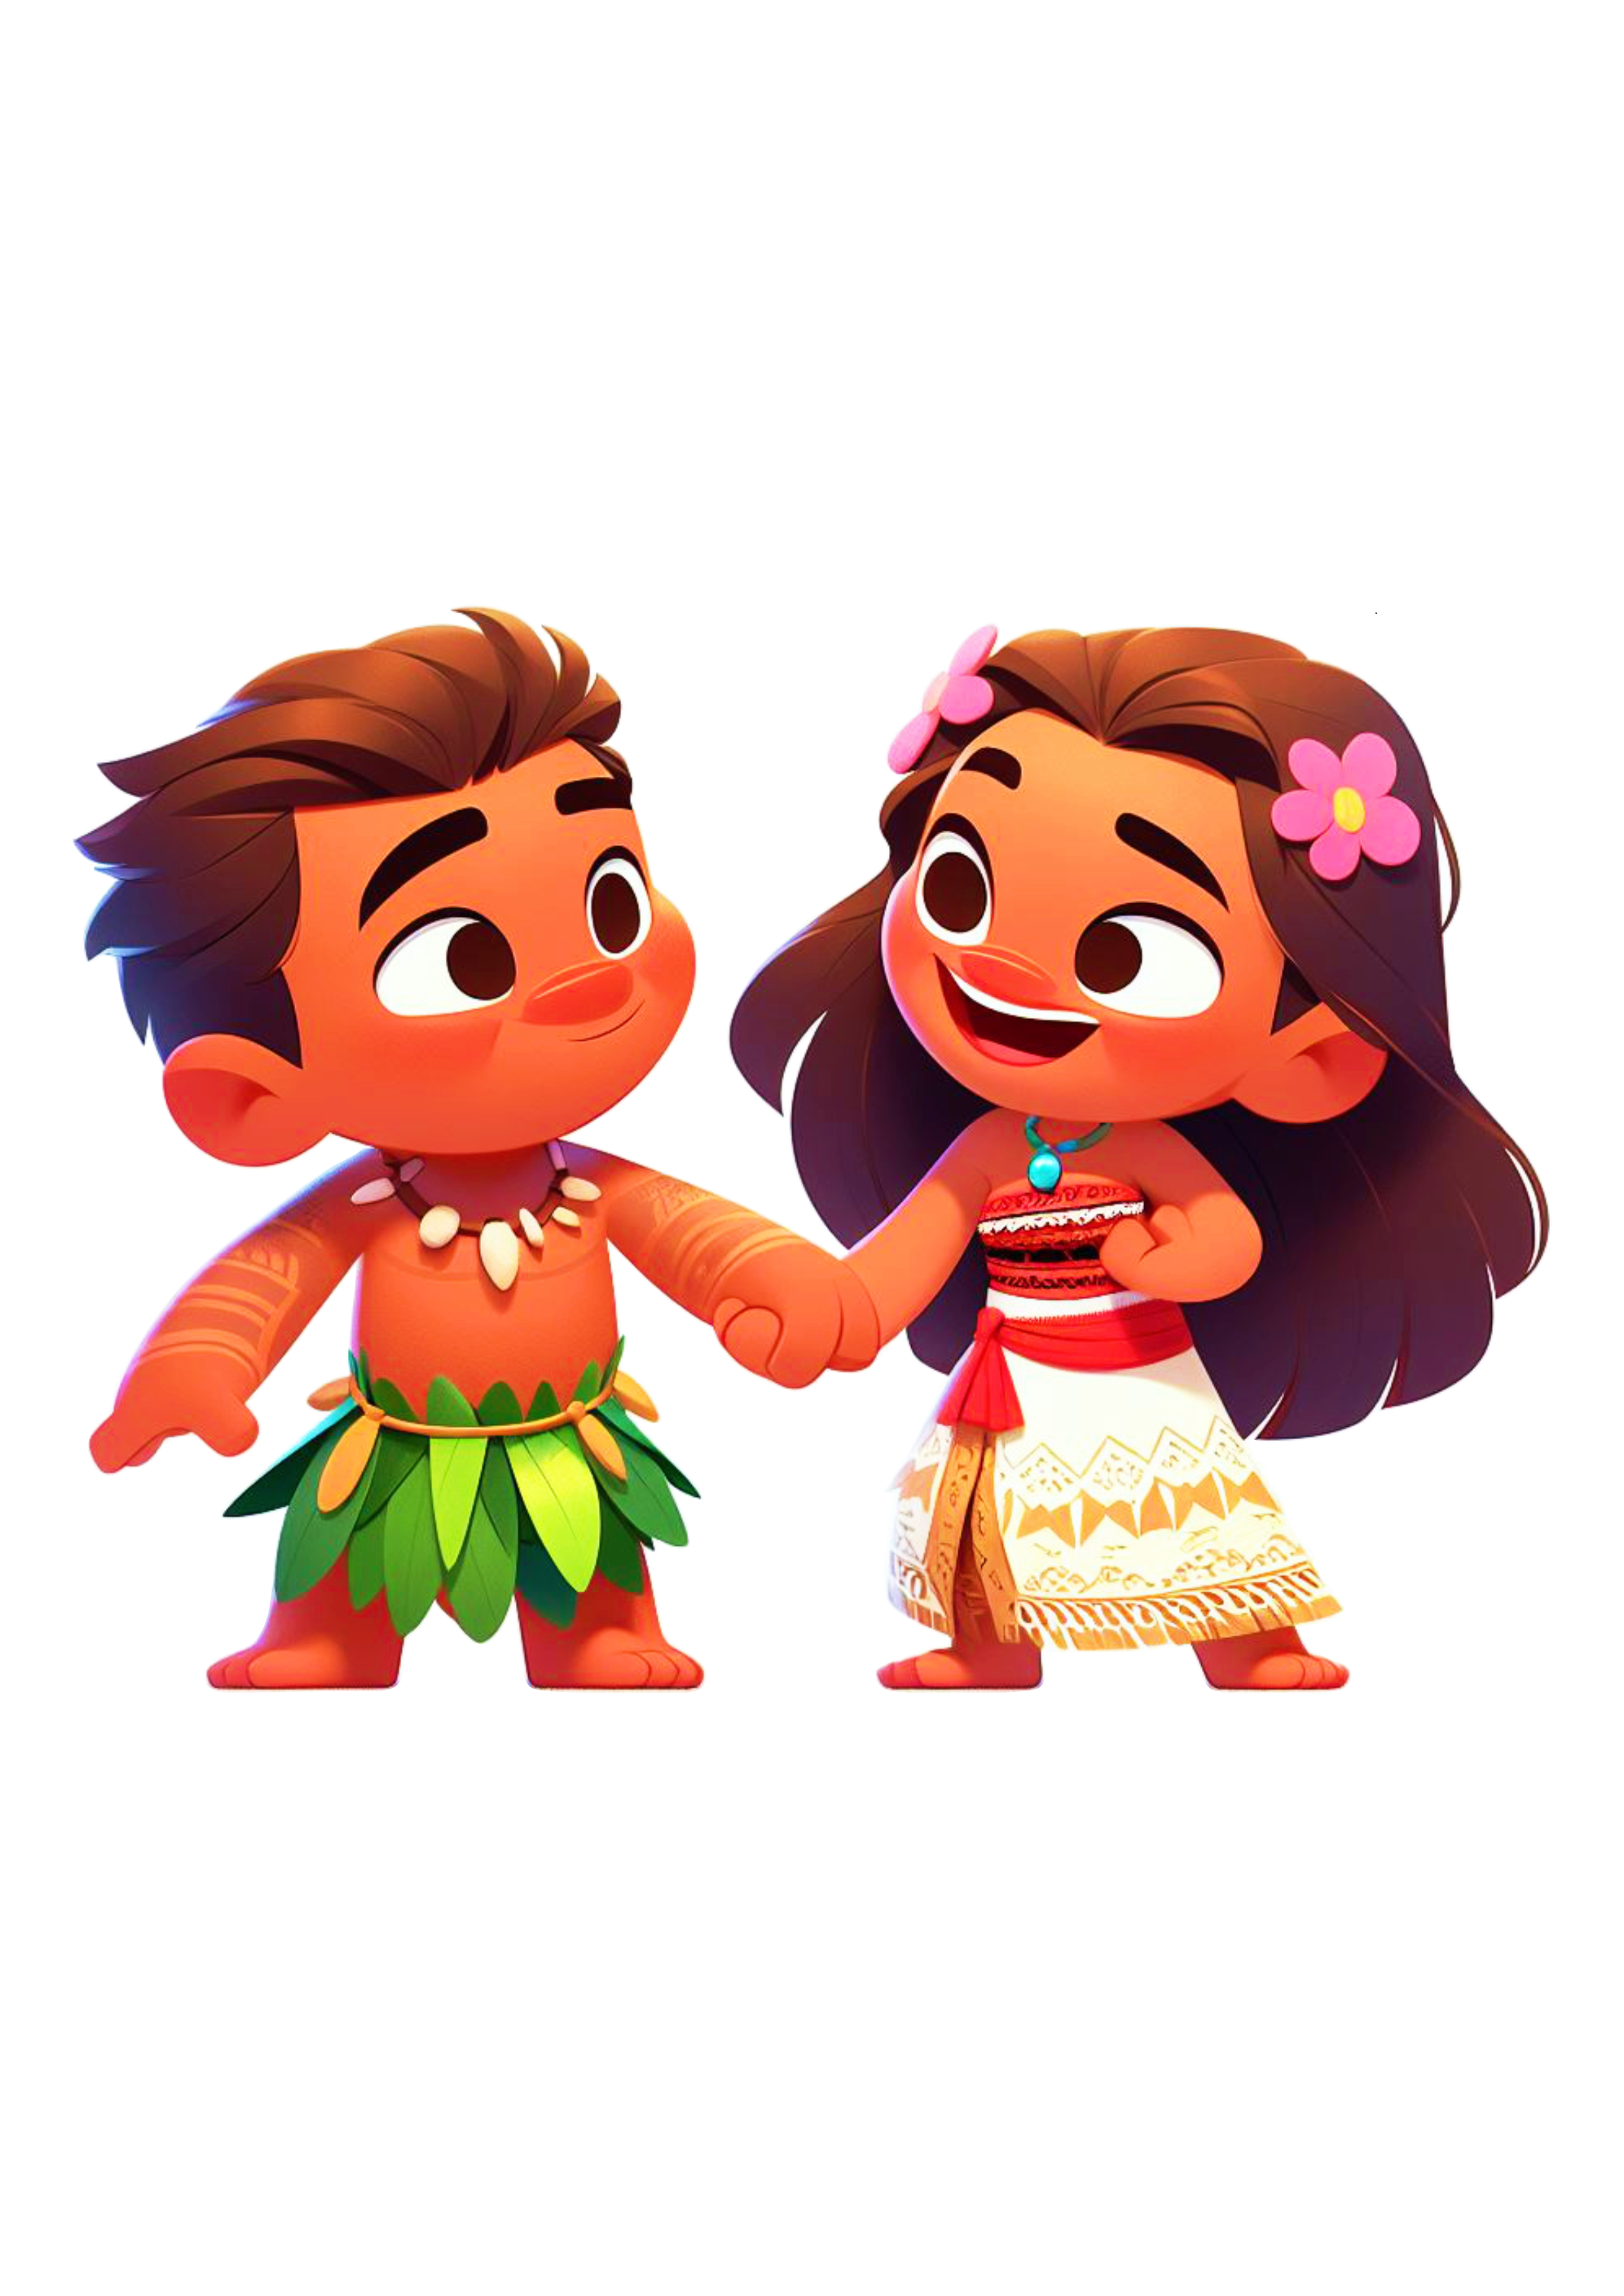 Moana and Maui Simple Drawing Disney Characters Children’s Animation Transparent Background Clipart Vector Illustration png